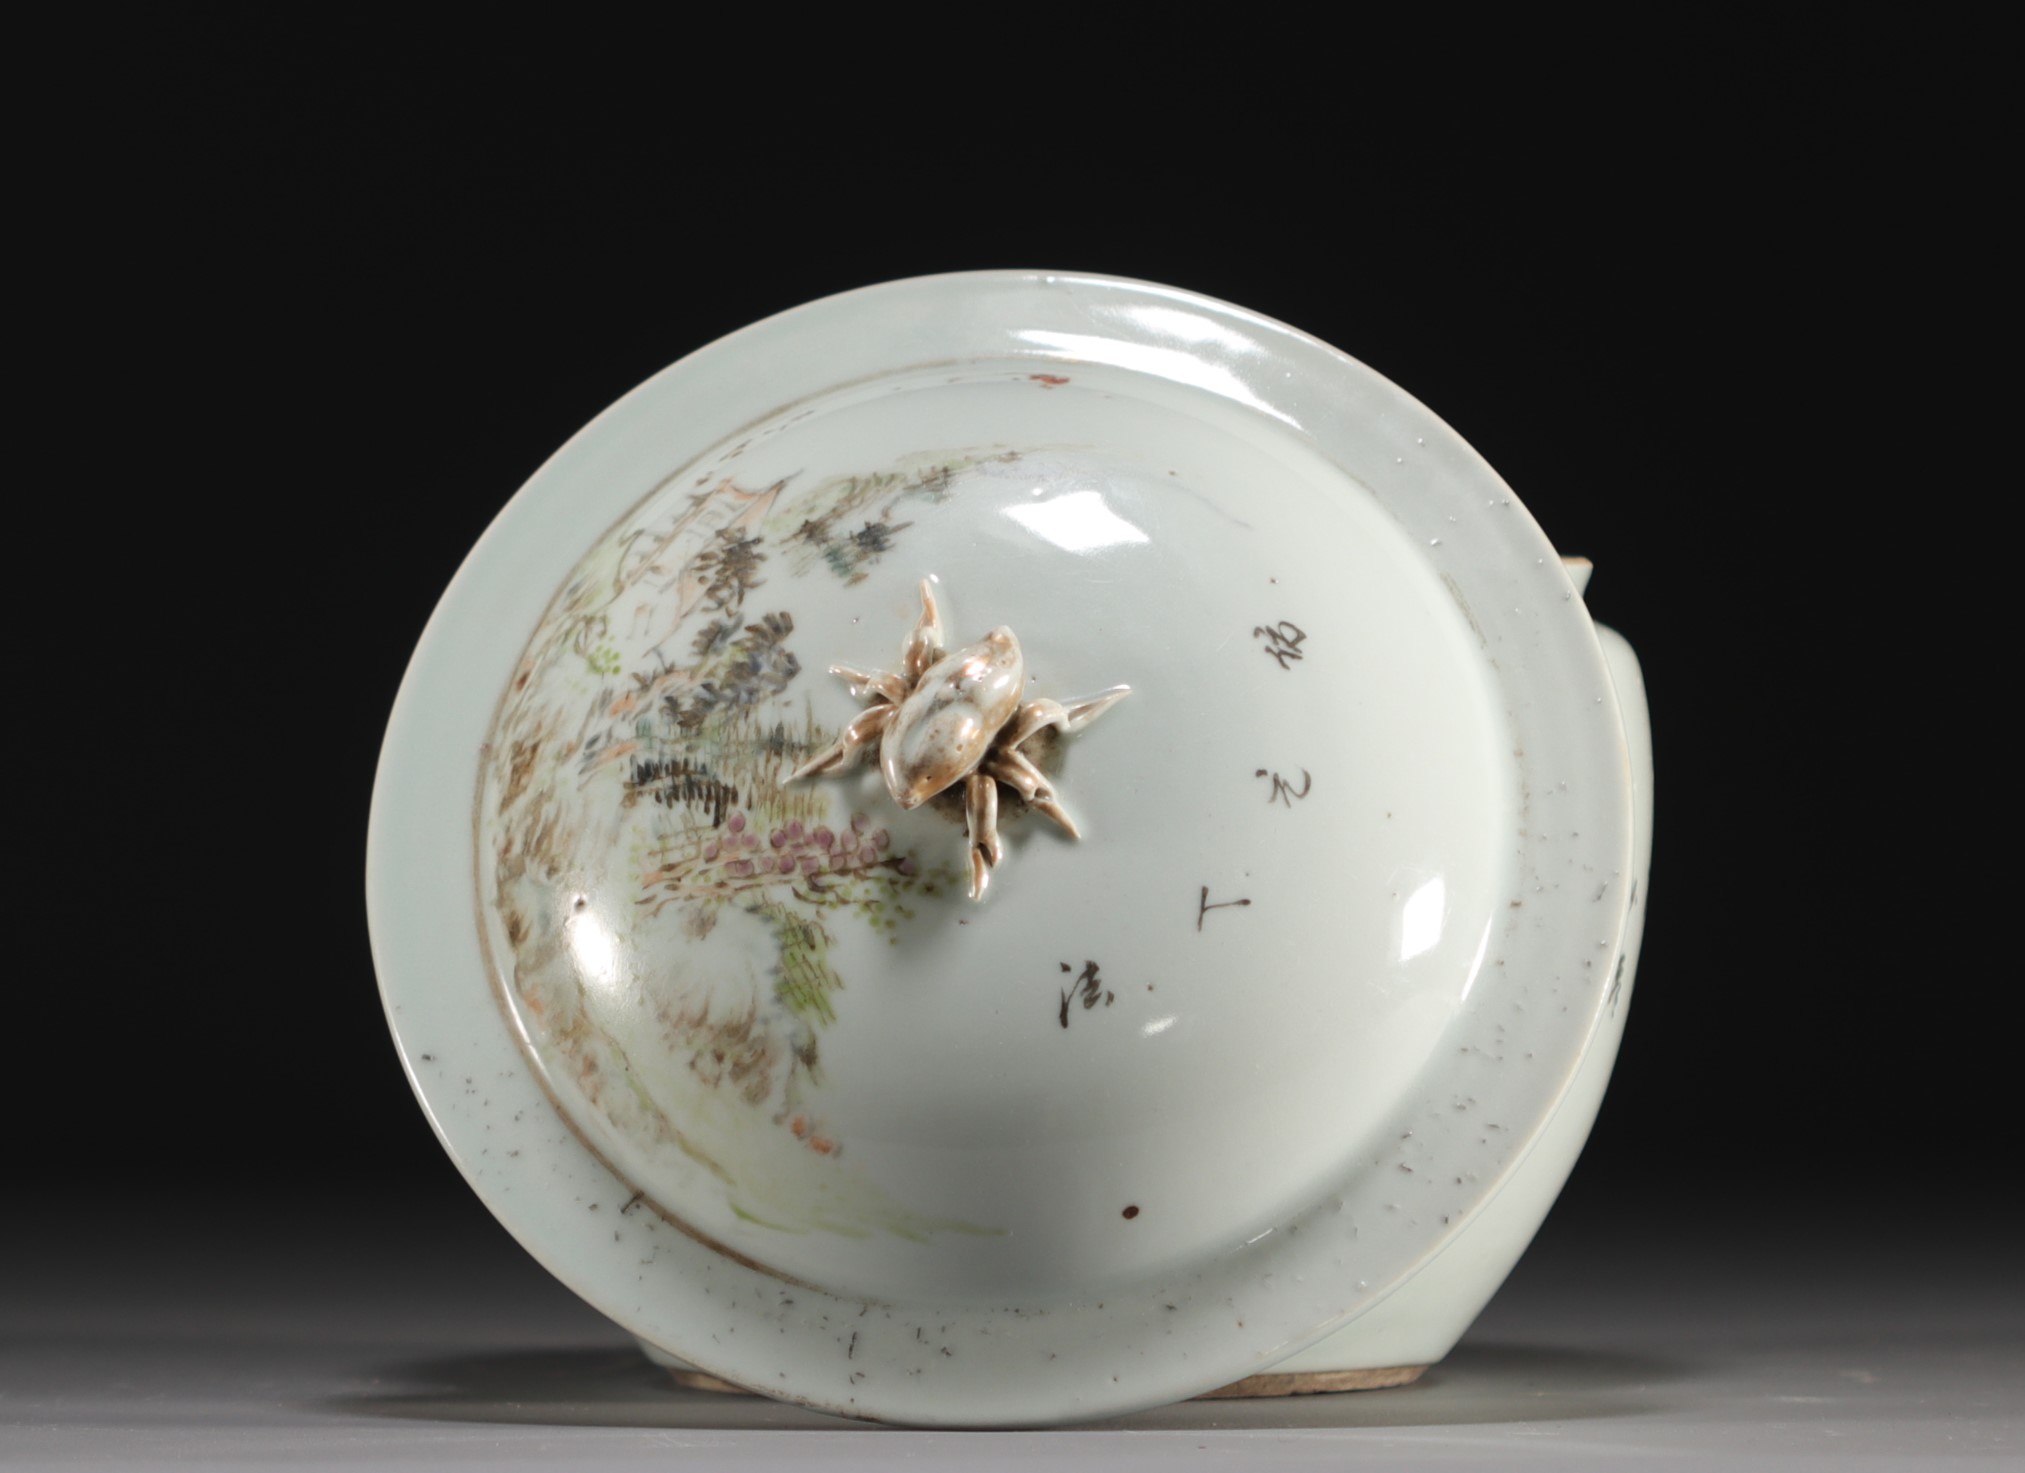 China - Tureen made of porcelain decorated with landscapes, 19th century. - Image 5 of 5